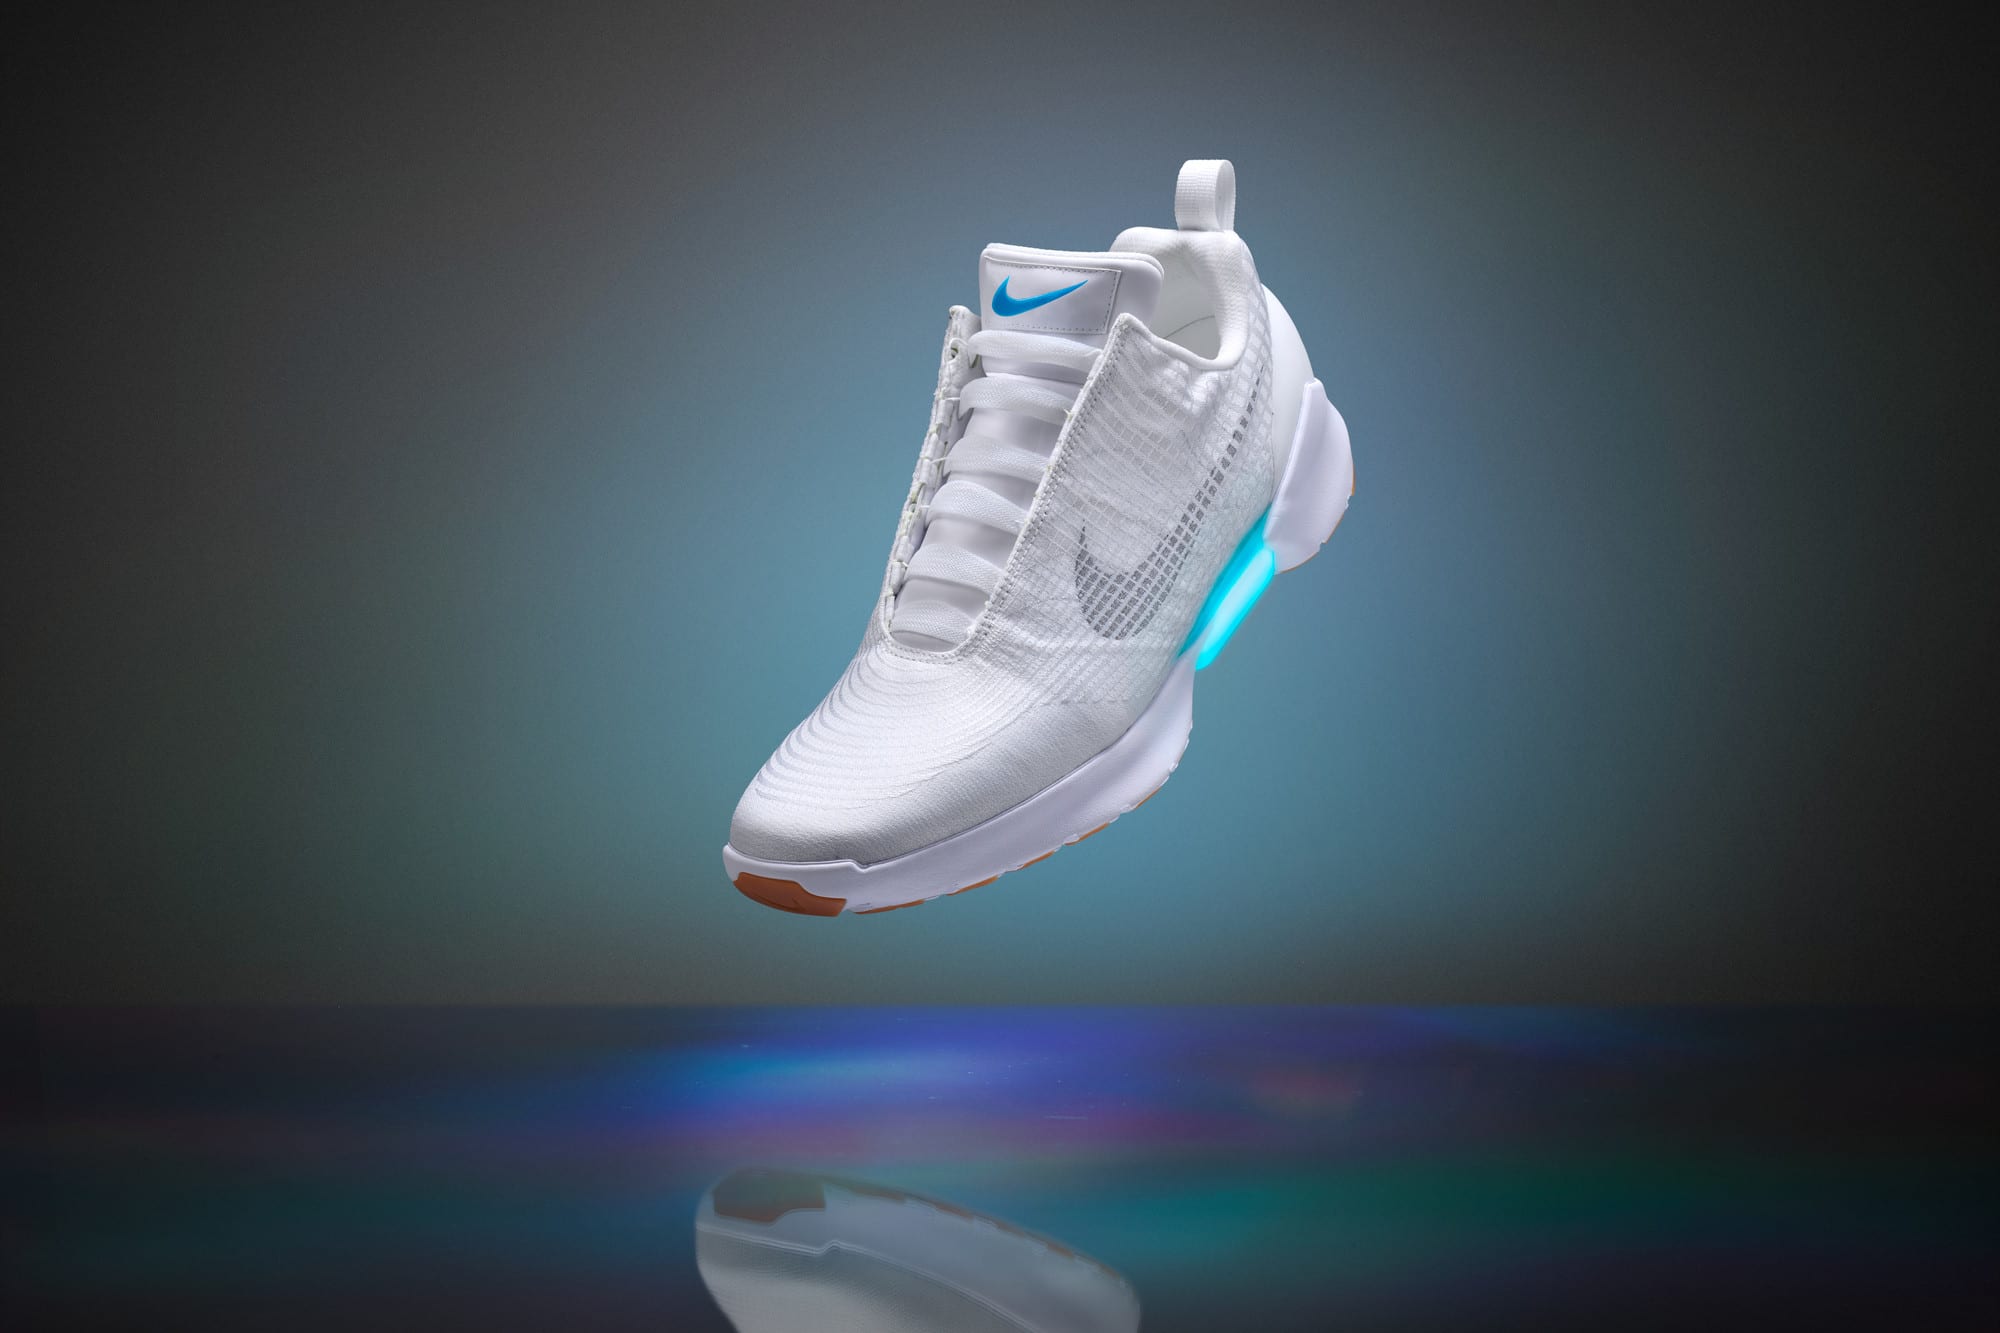 back to the future 2 shoes nike